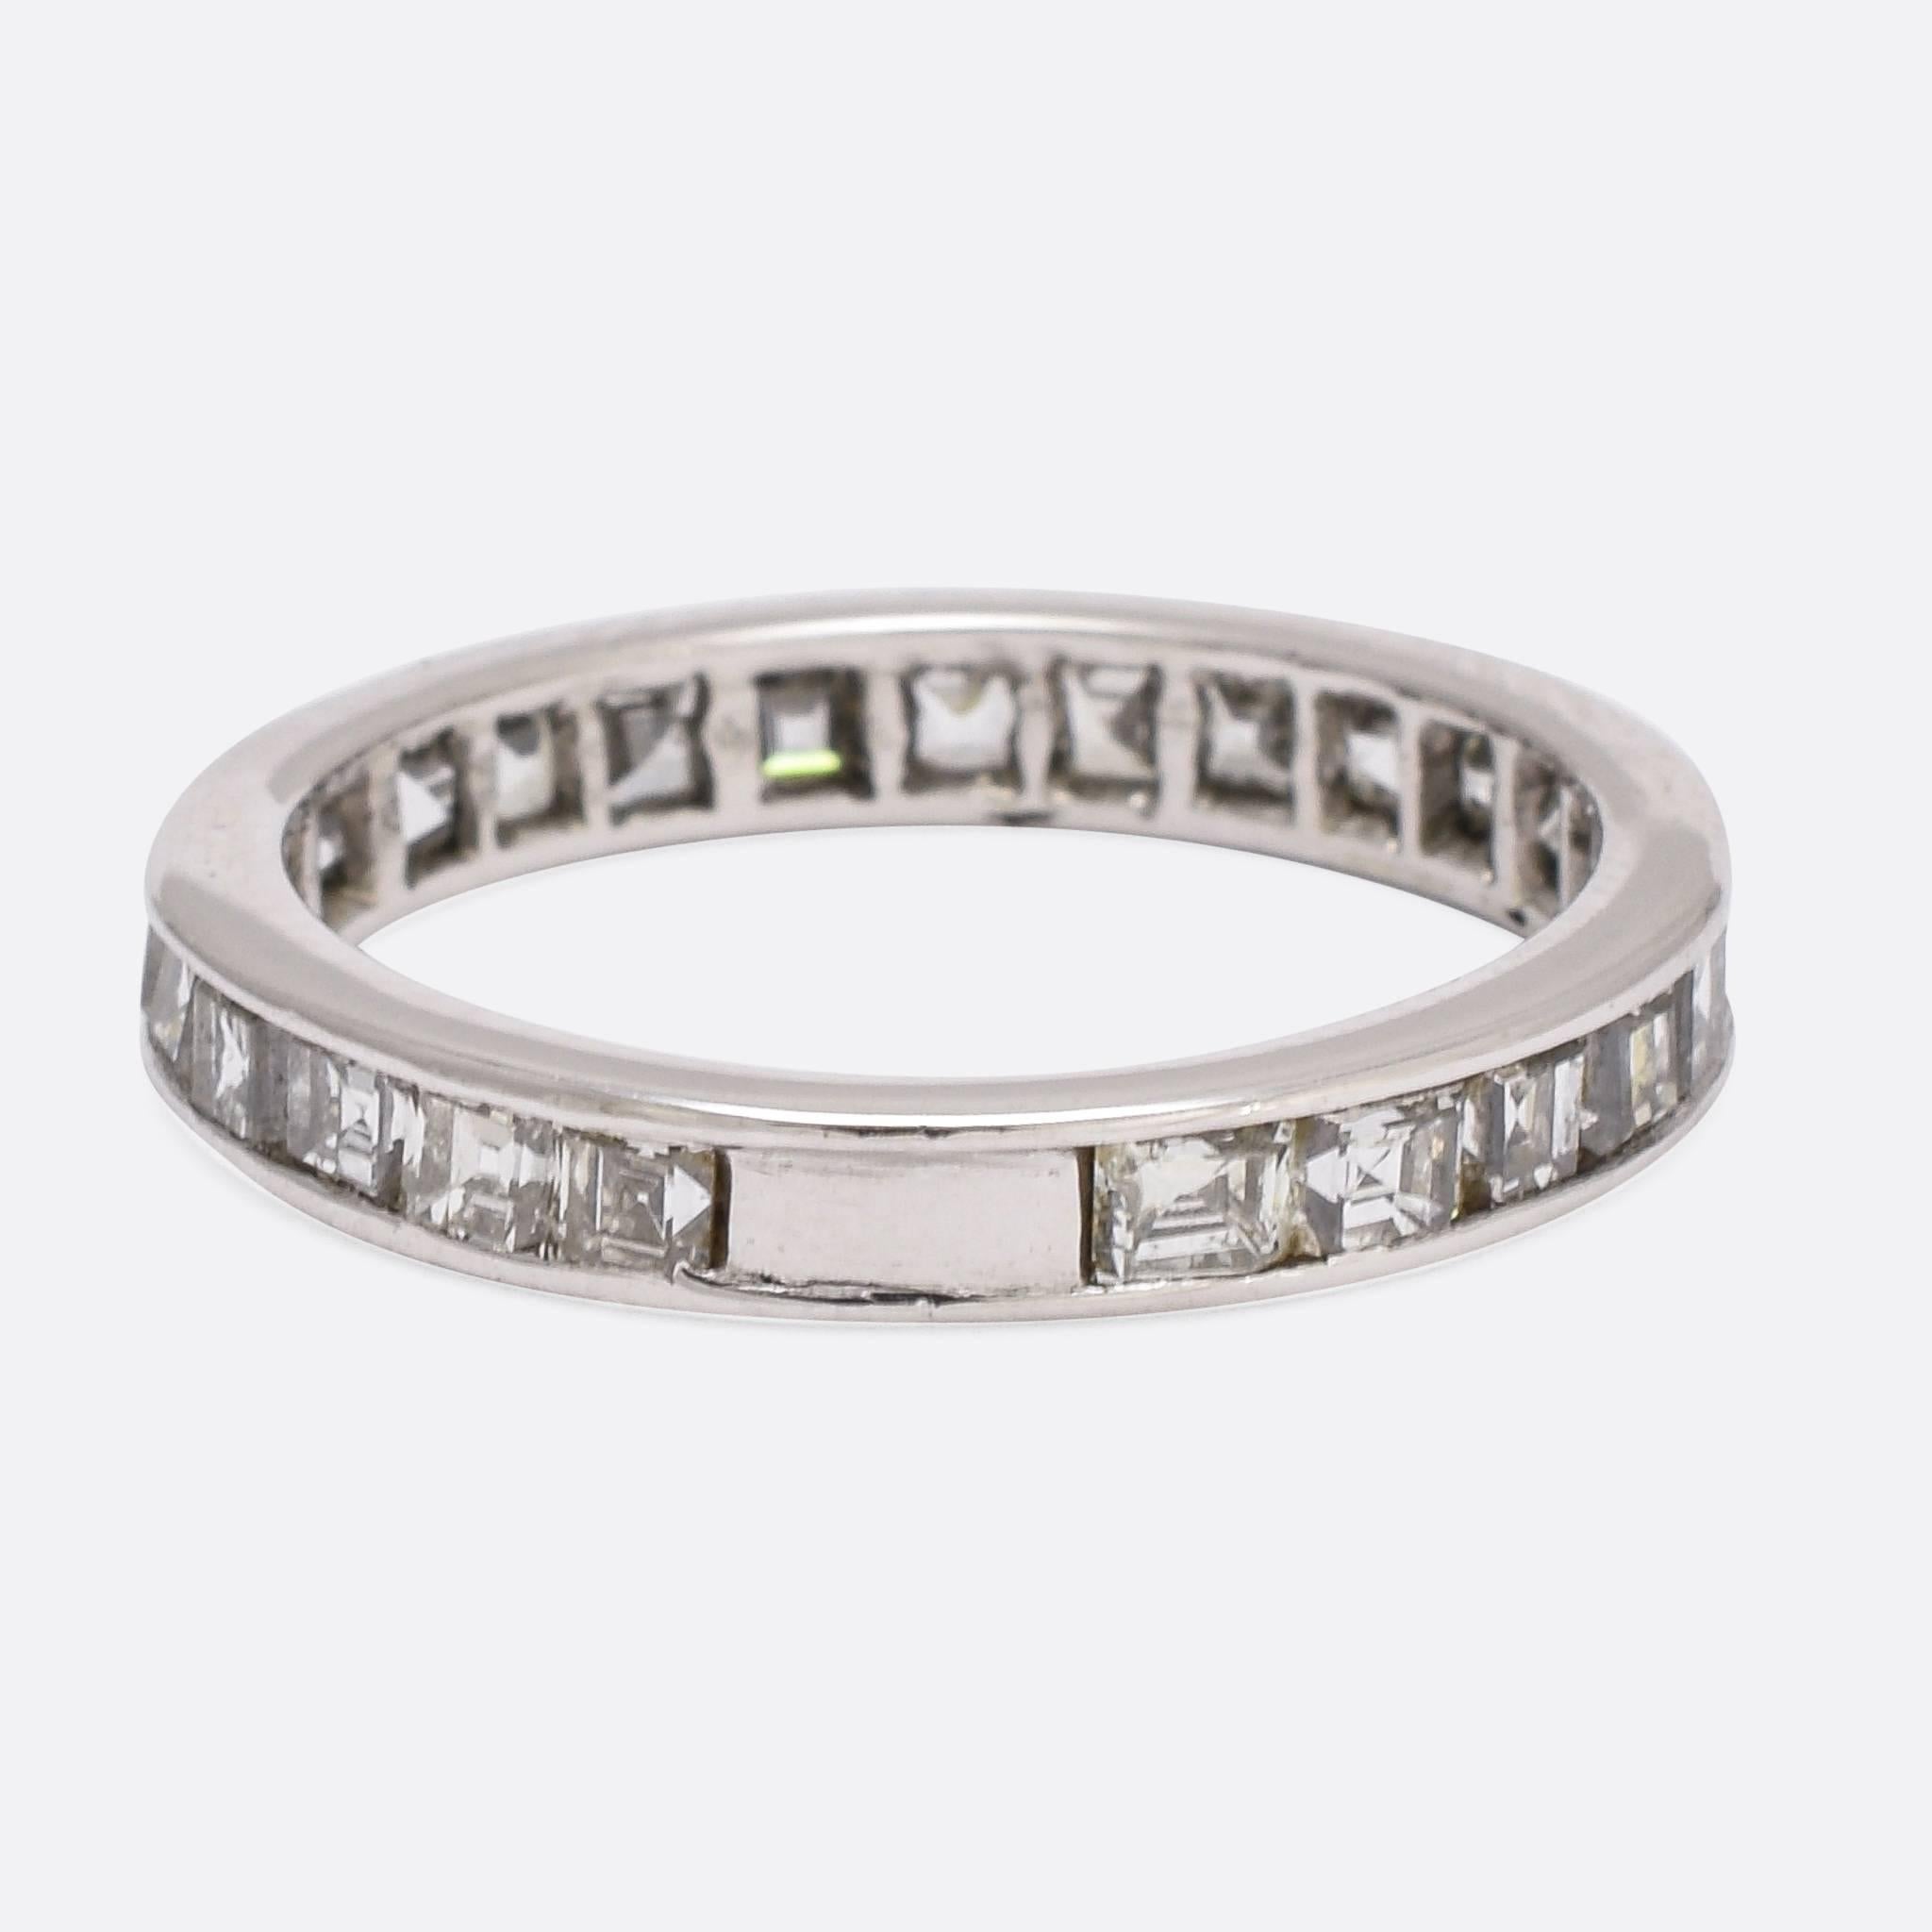 This exceptional vintage eternity ring is fully set with 25 carre cut diamonds, the weight totalling 2 carats. The ring is modelled in platinum throughout, and the deep stones are particularly clean and bright. An refined and timeless ring, unusual